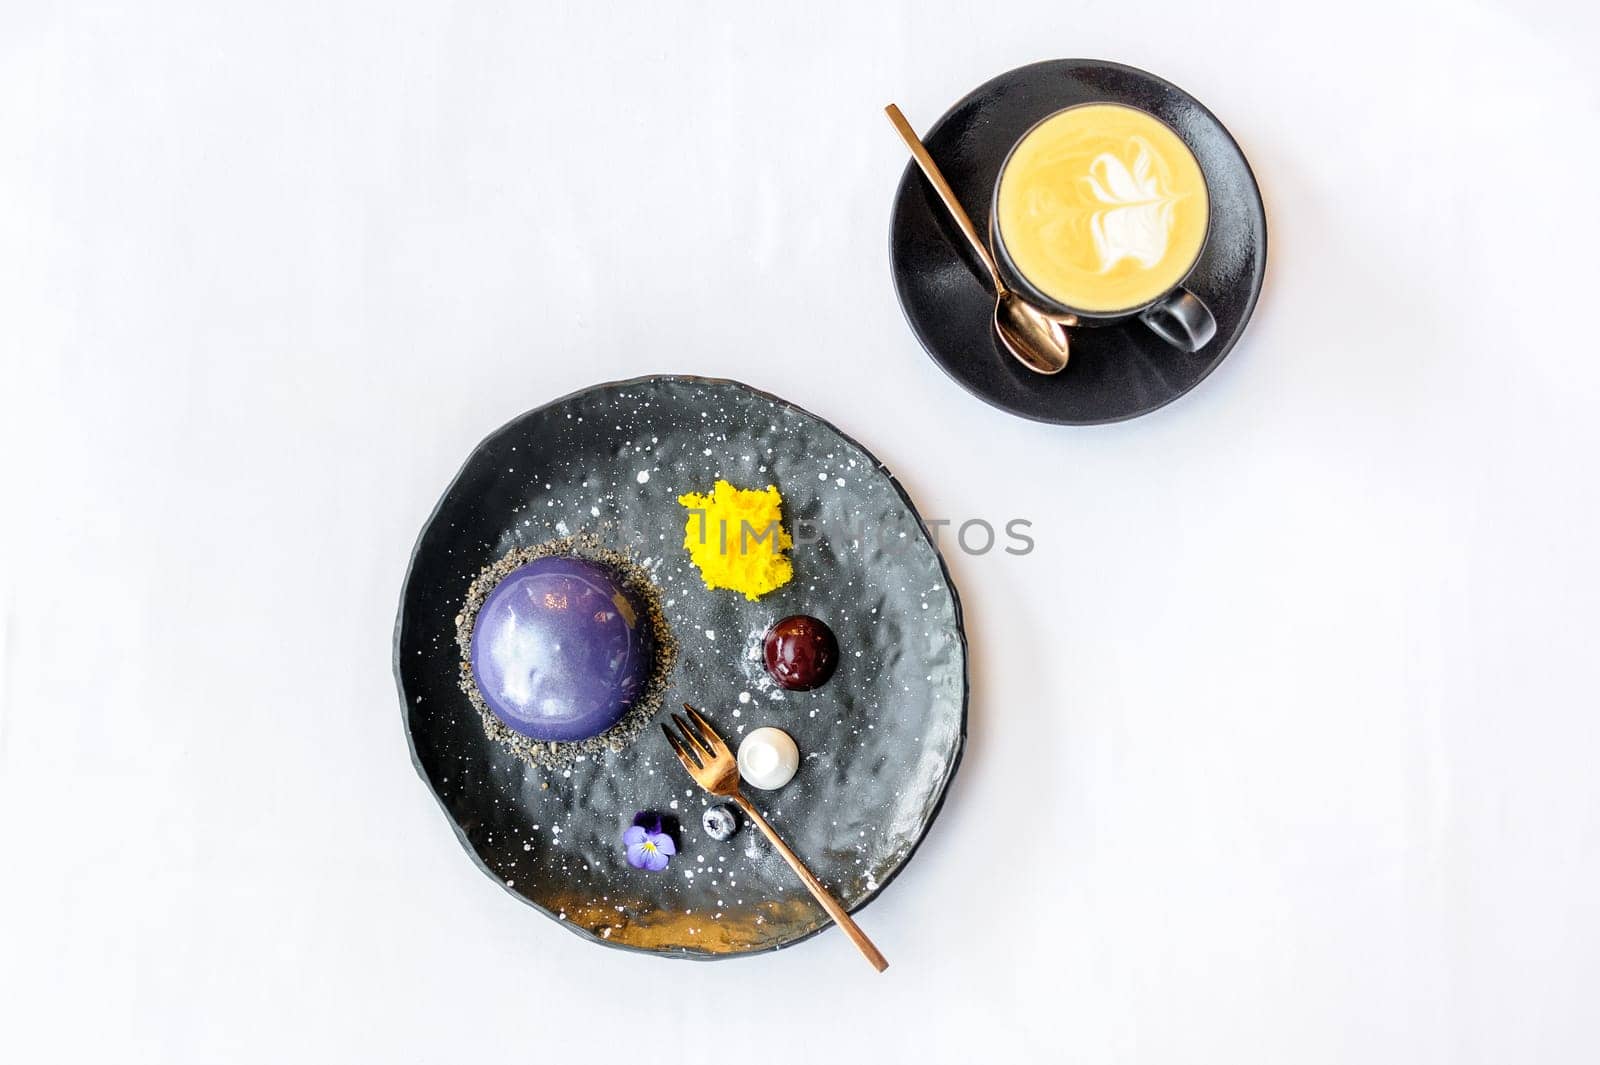 Space dessert on a black plate and a cup of coffee on a white background